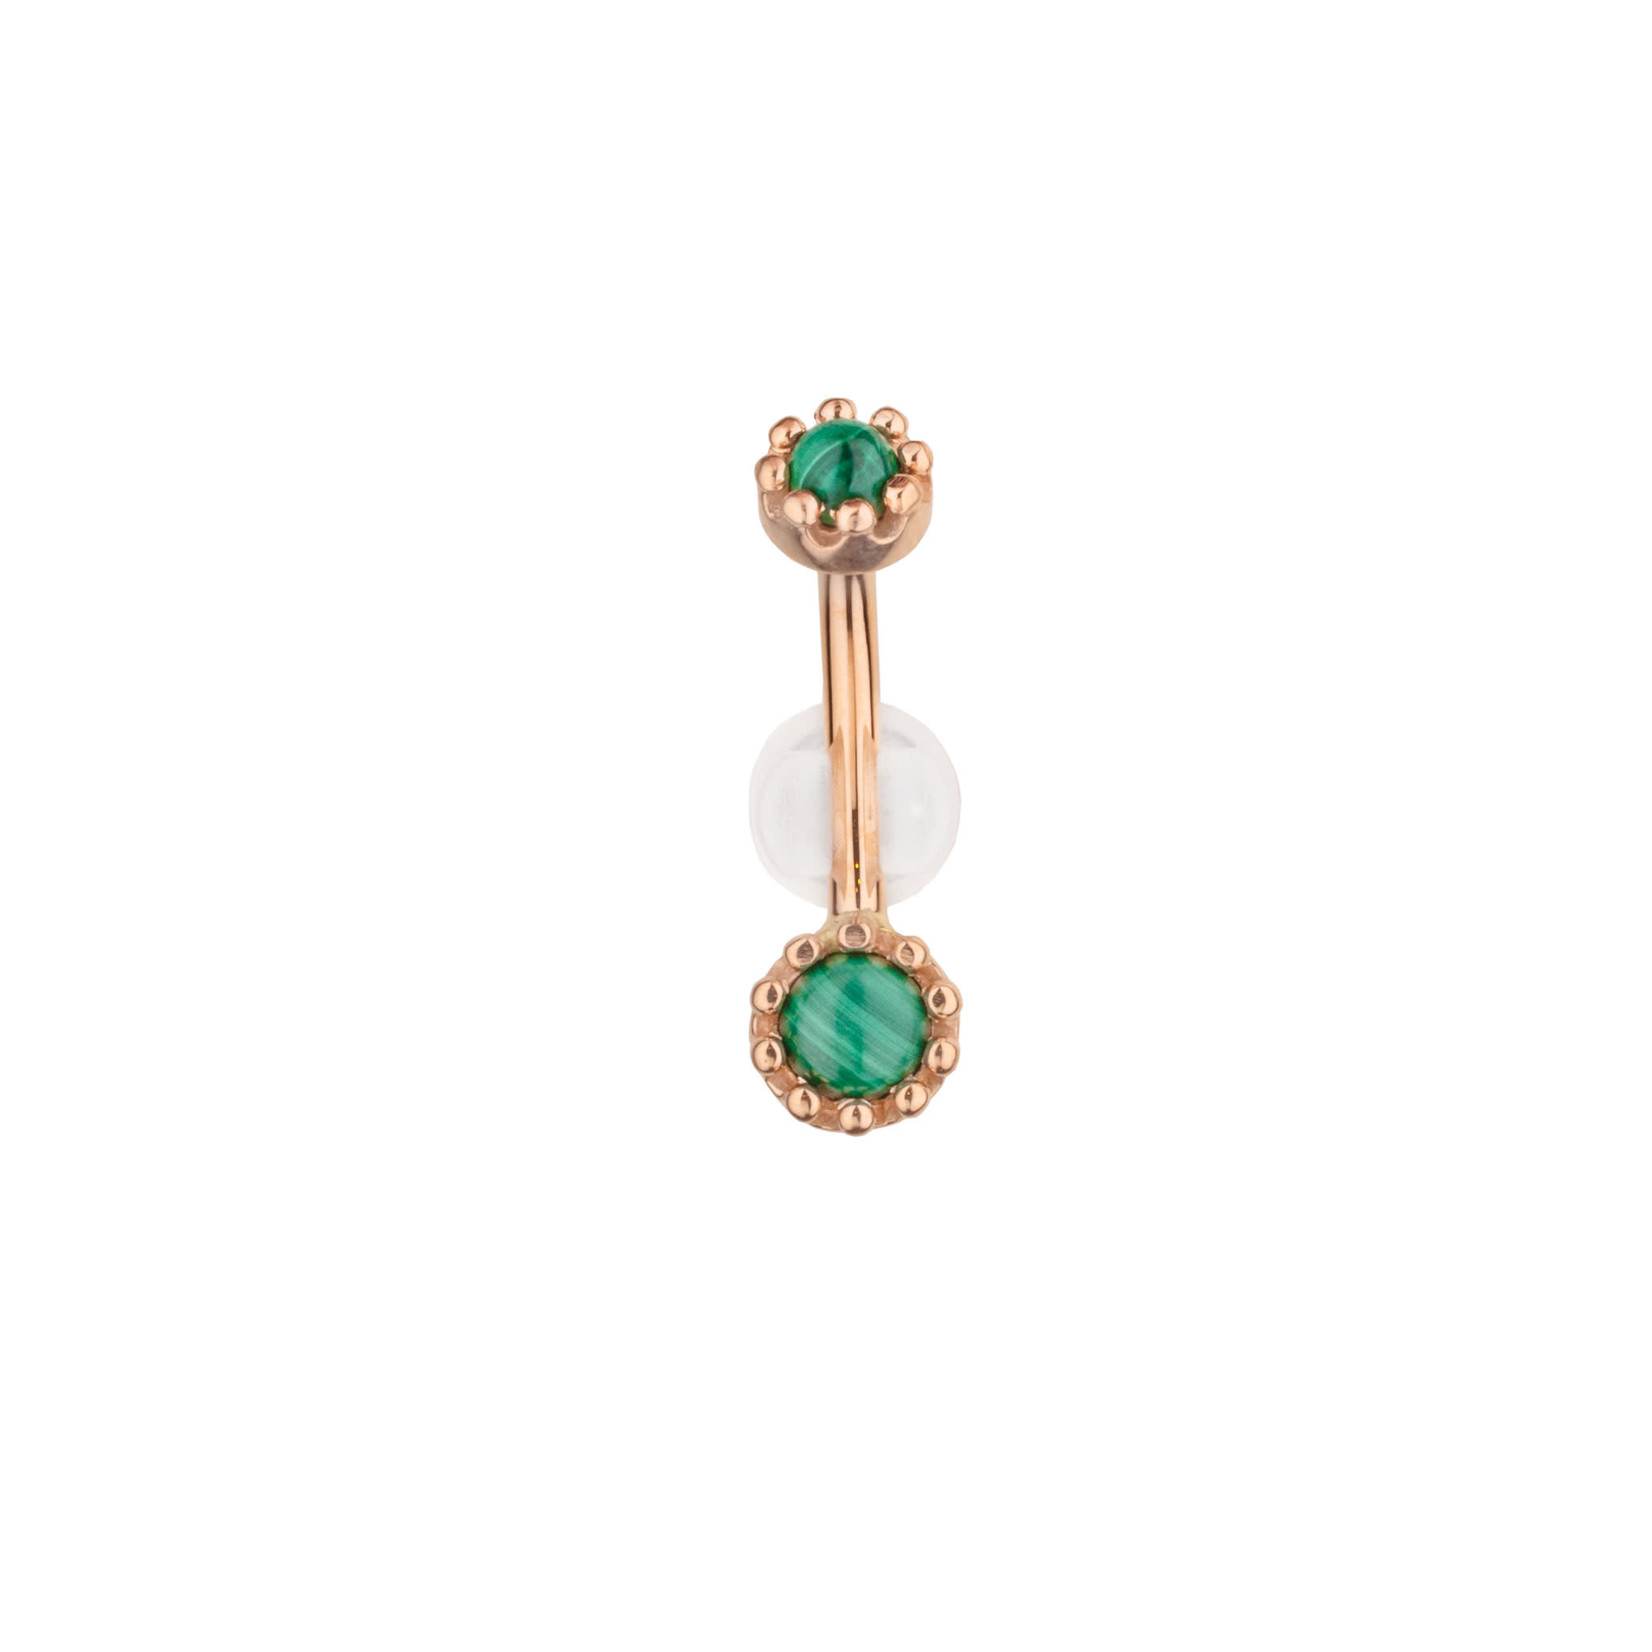 BVLA BVLA 14g 3/8 rose gold "Crown Cabochon" navel curve with 3.0 & 4.0 malachite cabochon